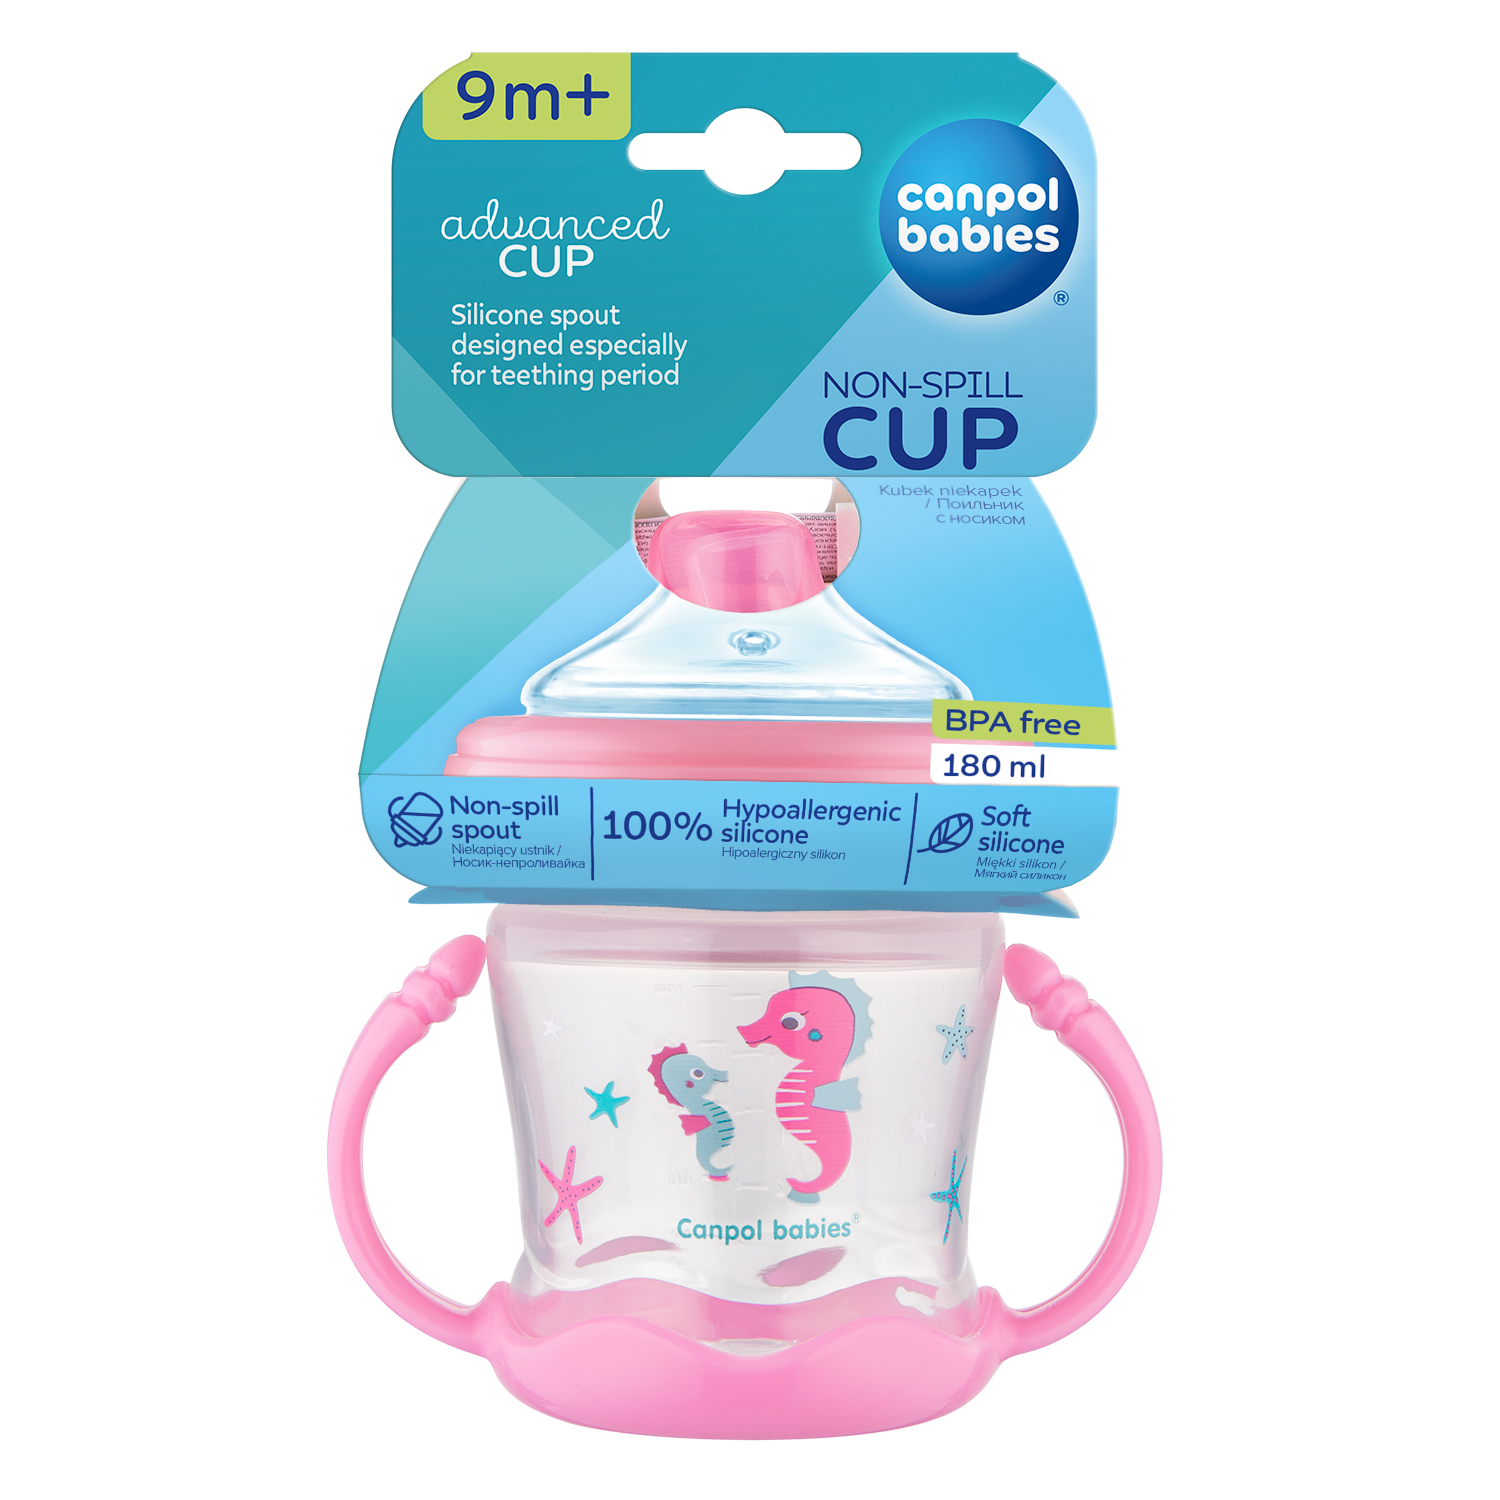 https://canpolbabies.com/eCatalog/canpol/eating-and-drinking/cups-and-sport-cups/57-300-new/57_300_pin-pack-front-wiz.jpg